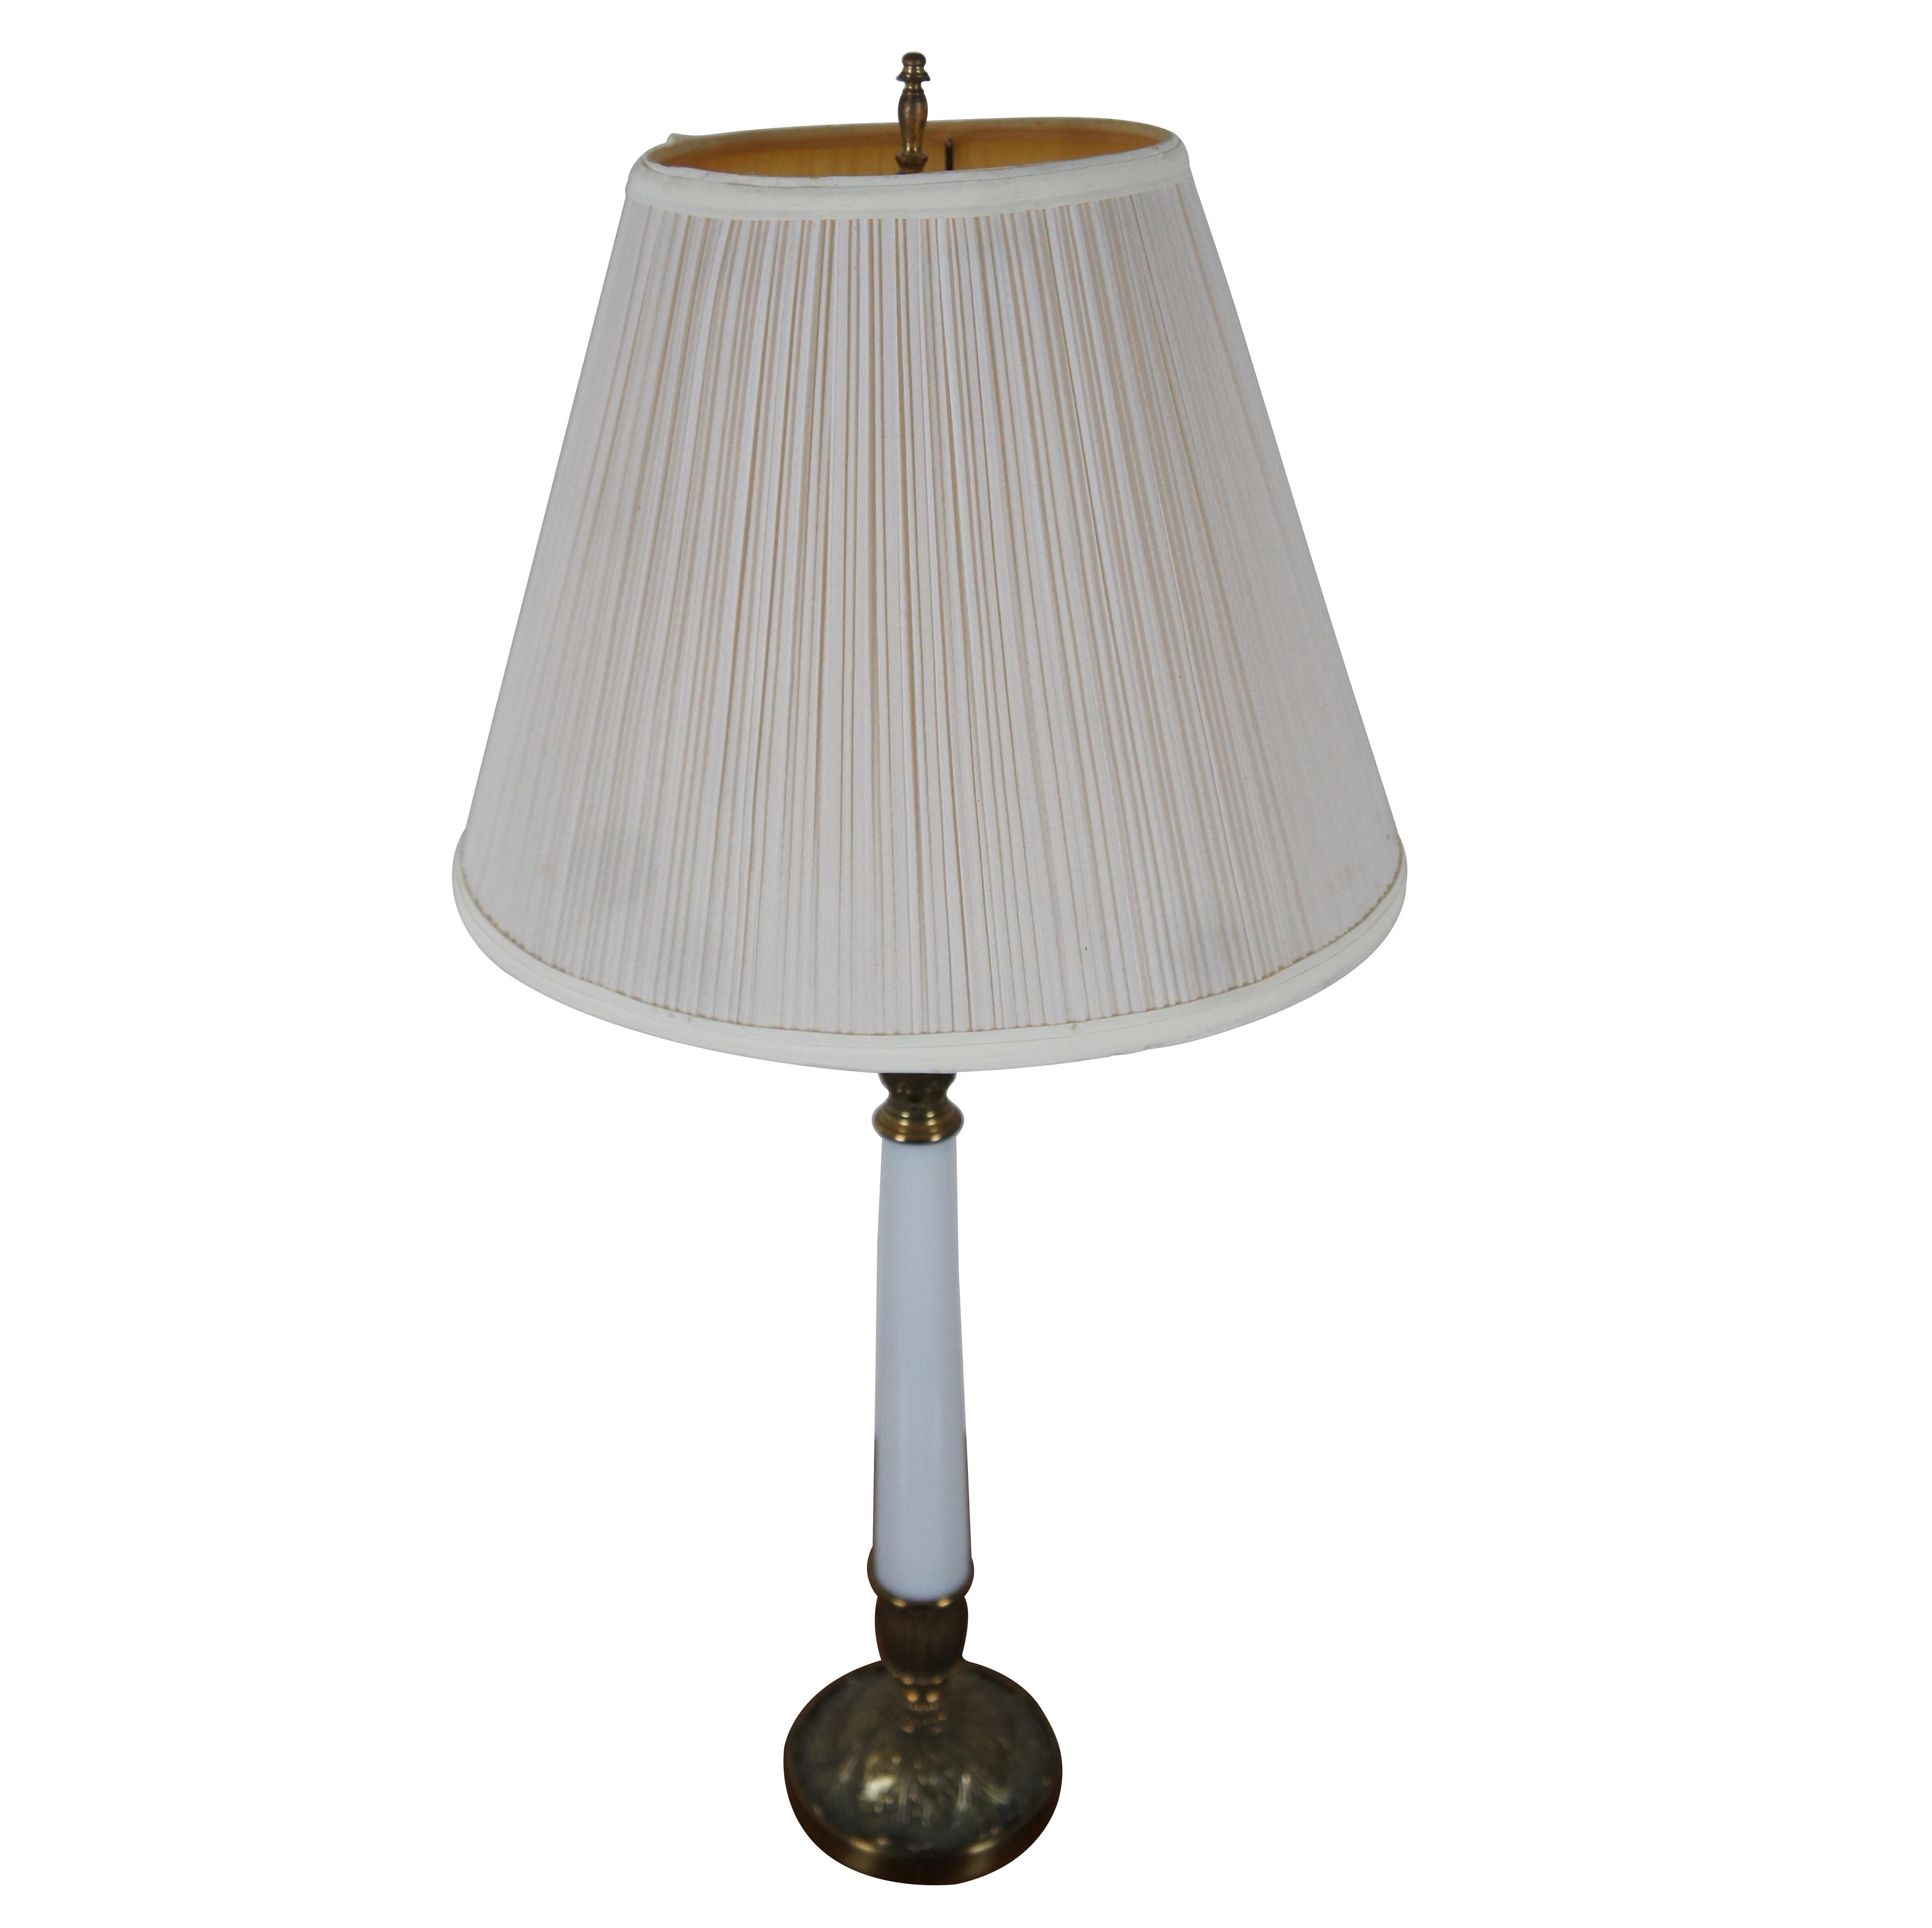 Vintage midcentury Stiffel brass and white porcelain candlestick shaped, Hollywood Regency style table lamp. Includes a simple pleated shade.

Measures: 5” x 23” / Shade - 14” x 10.5” / Total Height – 30” (Diameter x Height).